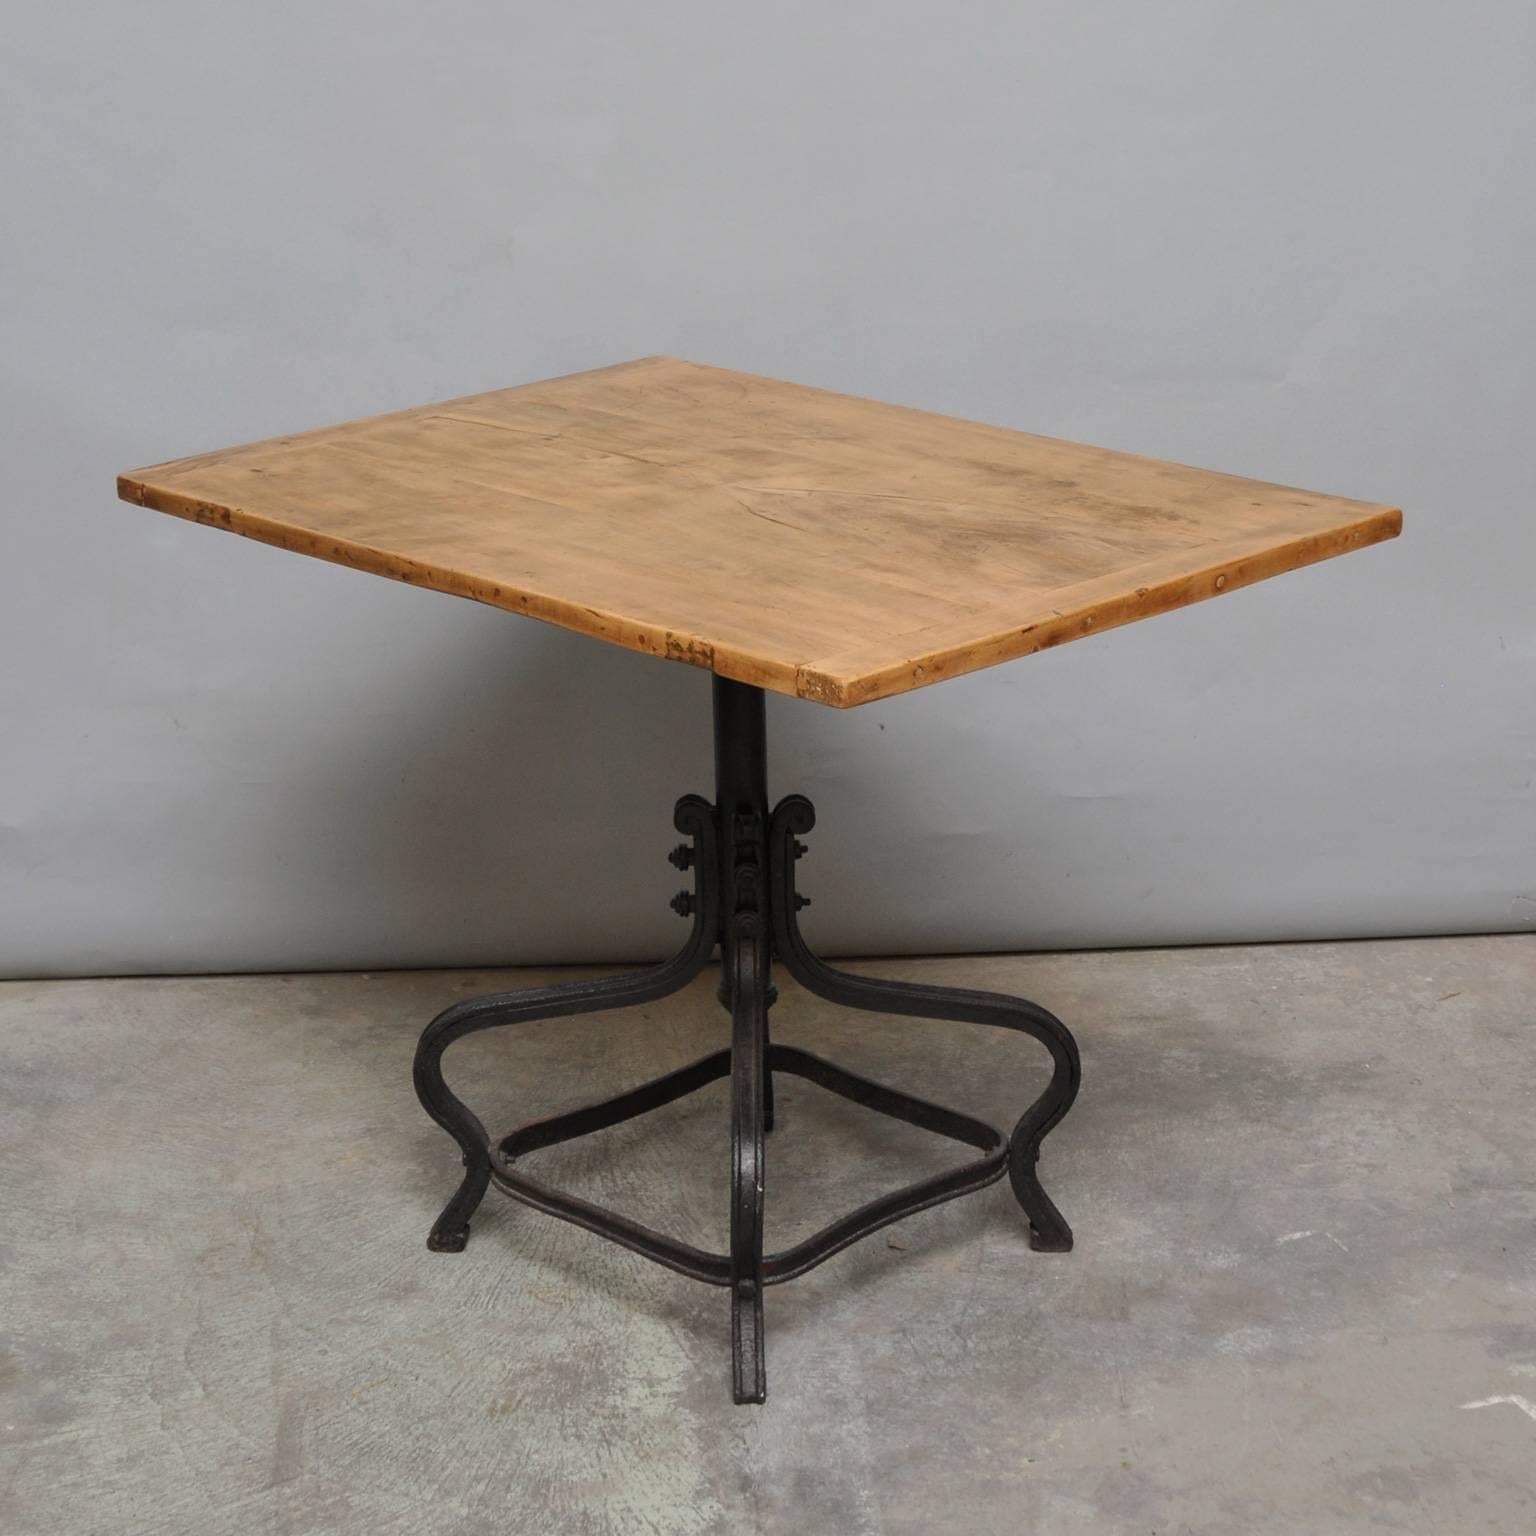 Small table on a cast iron foot with nice decoration. The table was produced in the 1920s.